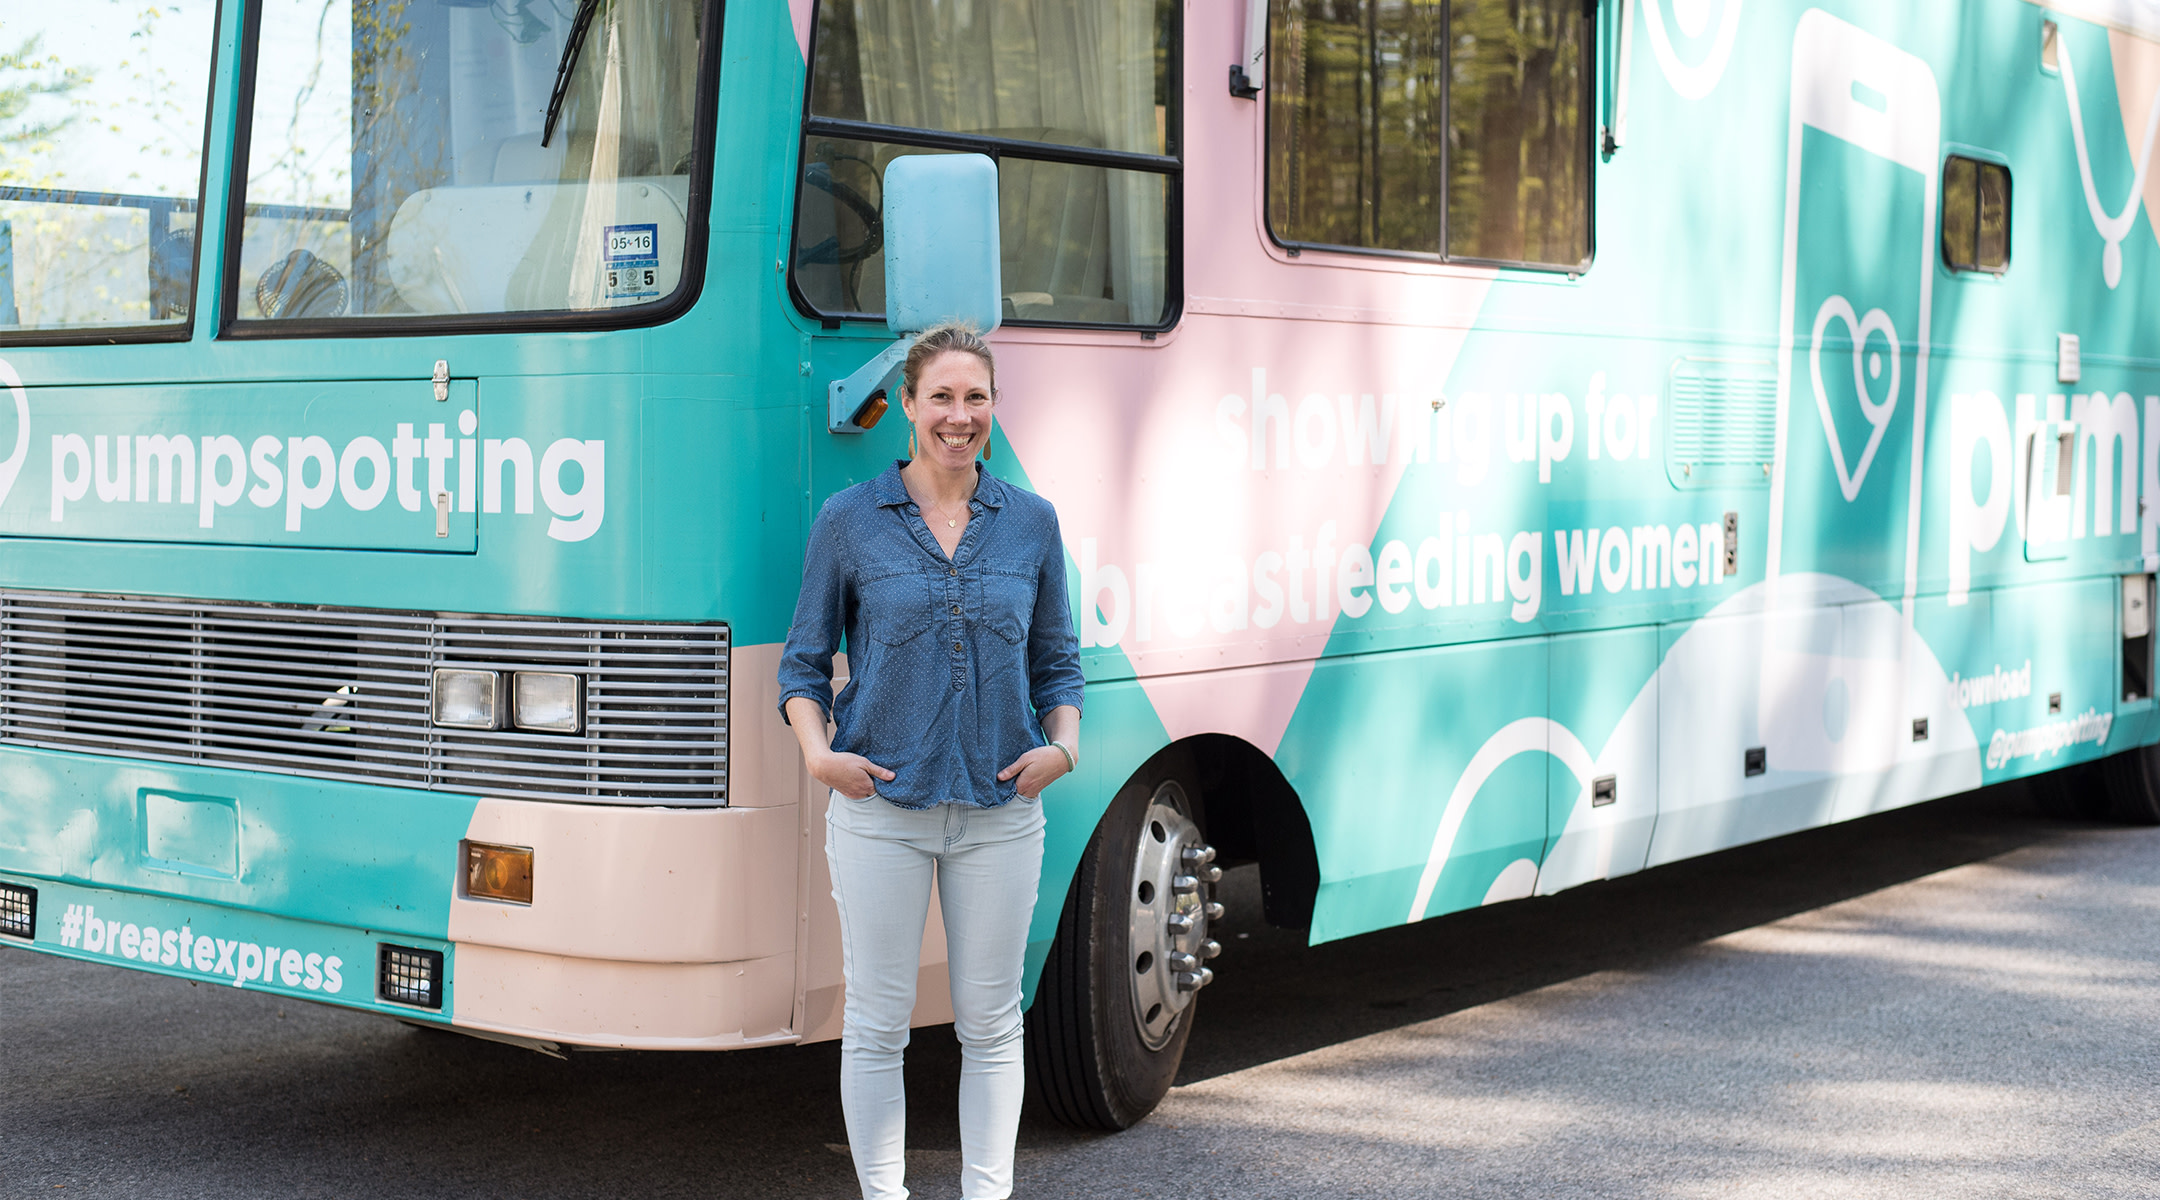 Amy VanHaren in front of a breastfeeding-themed RV